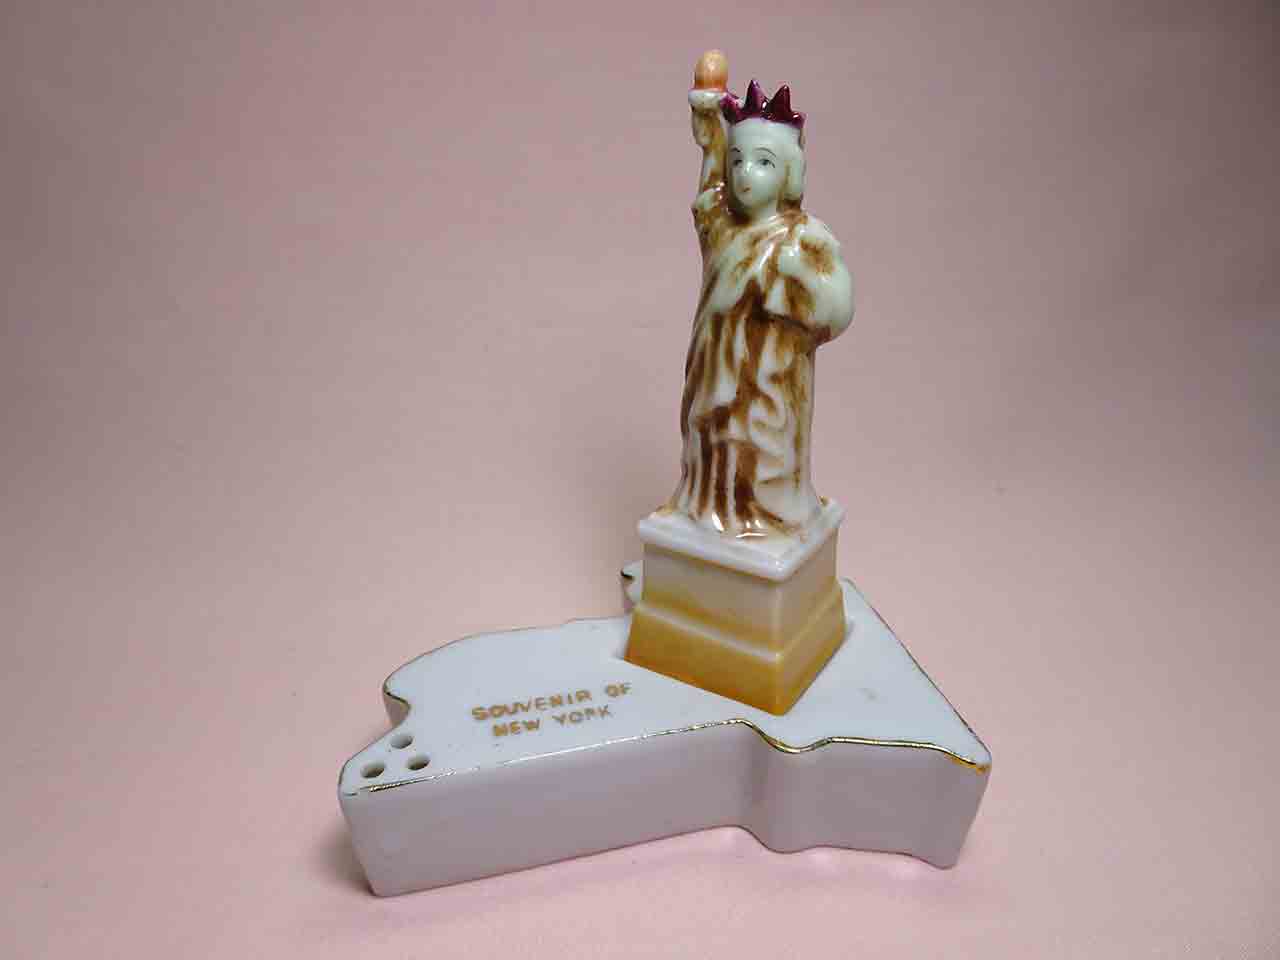 New York with Statue of Liberty salt and pepper shakers